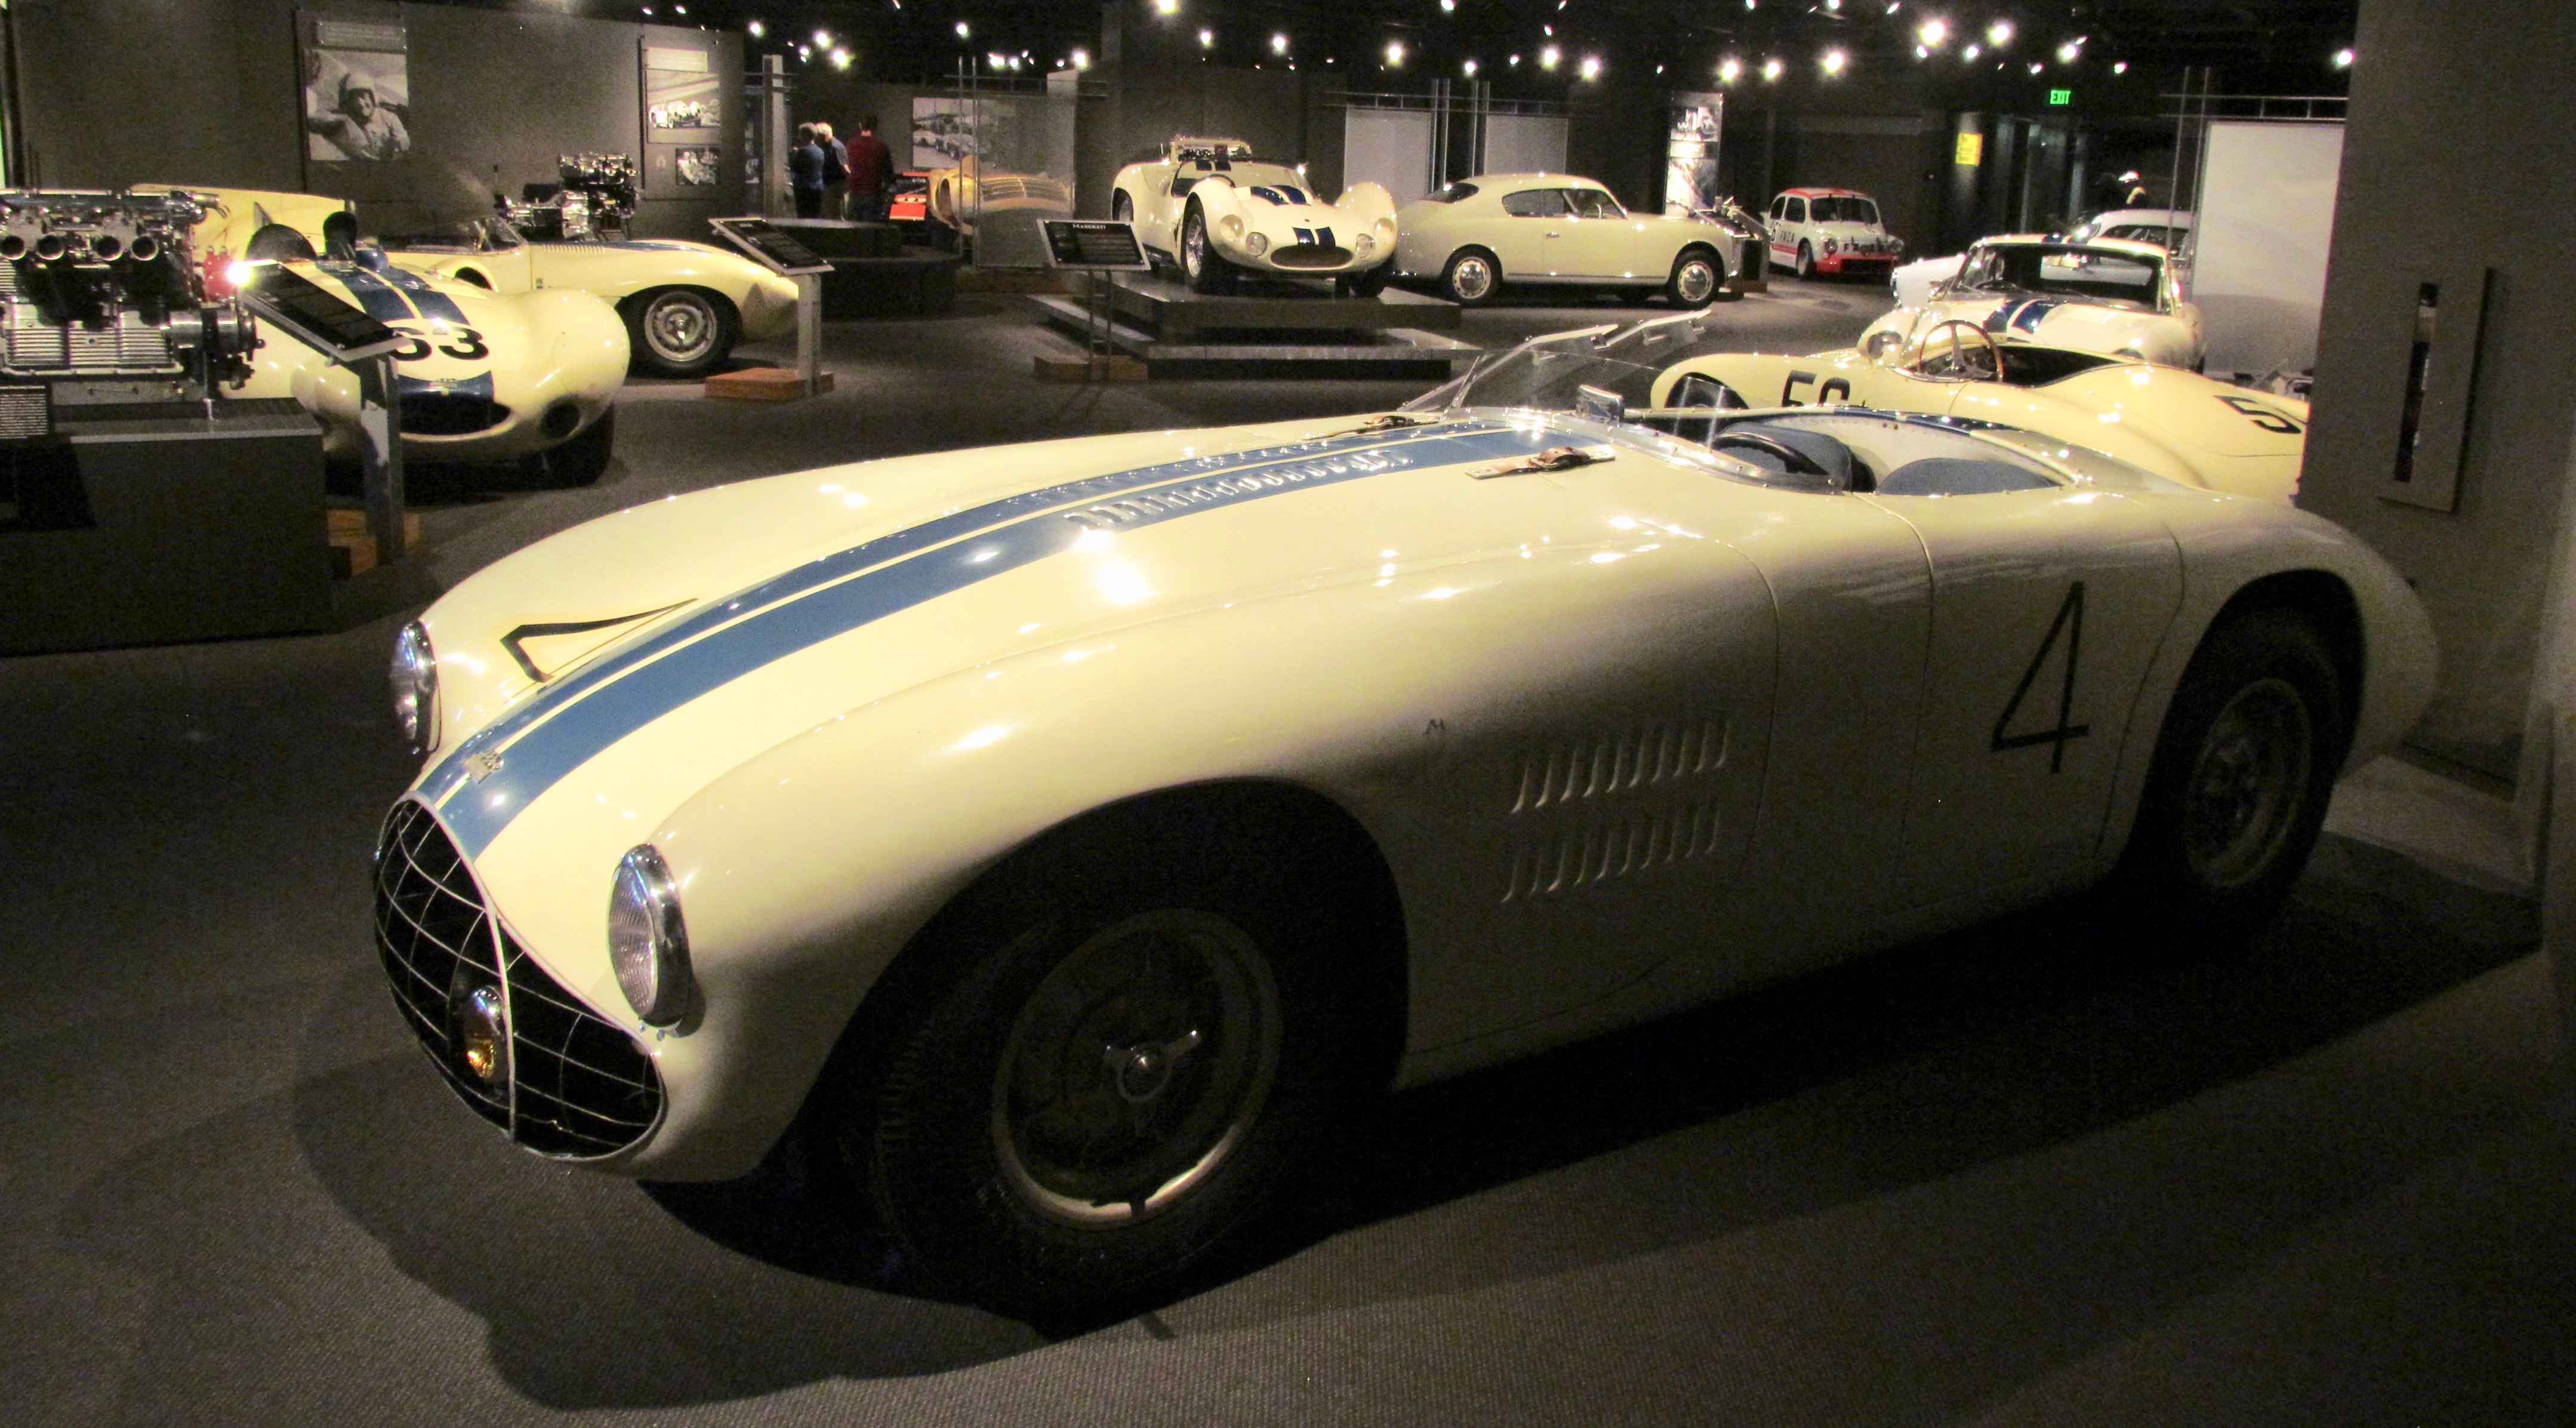 , There’s also a terrific Porsche exhibit on the East Coast, ClassicCars.com Journal